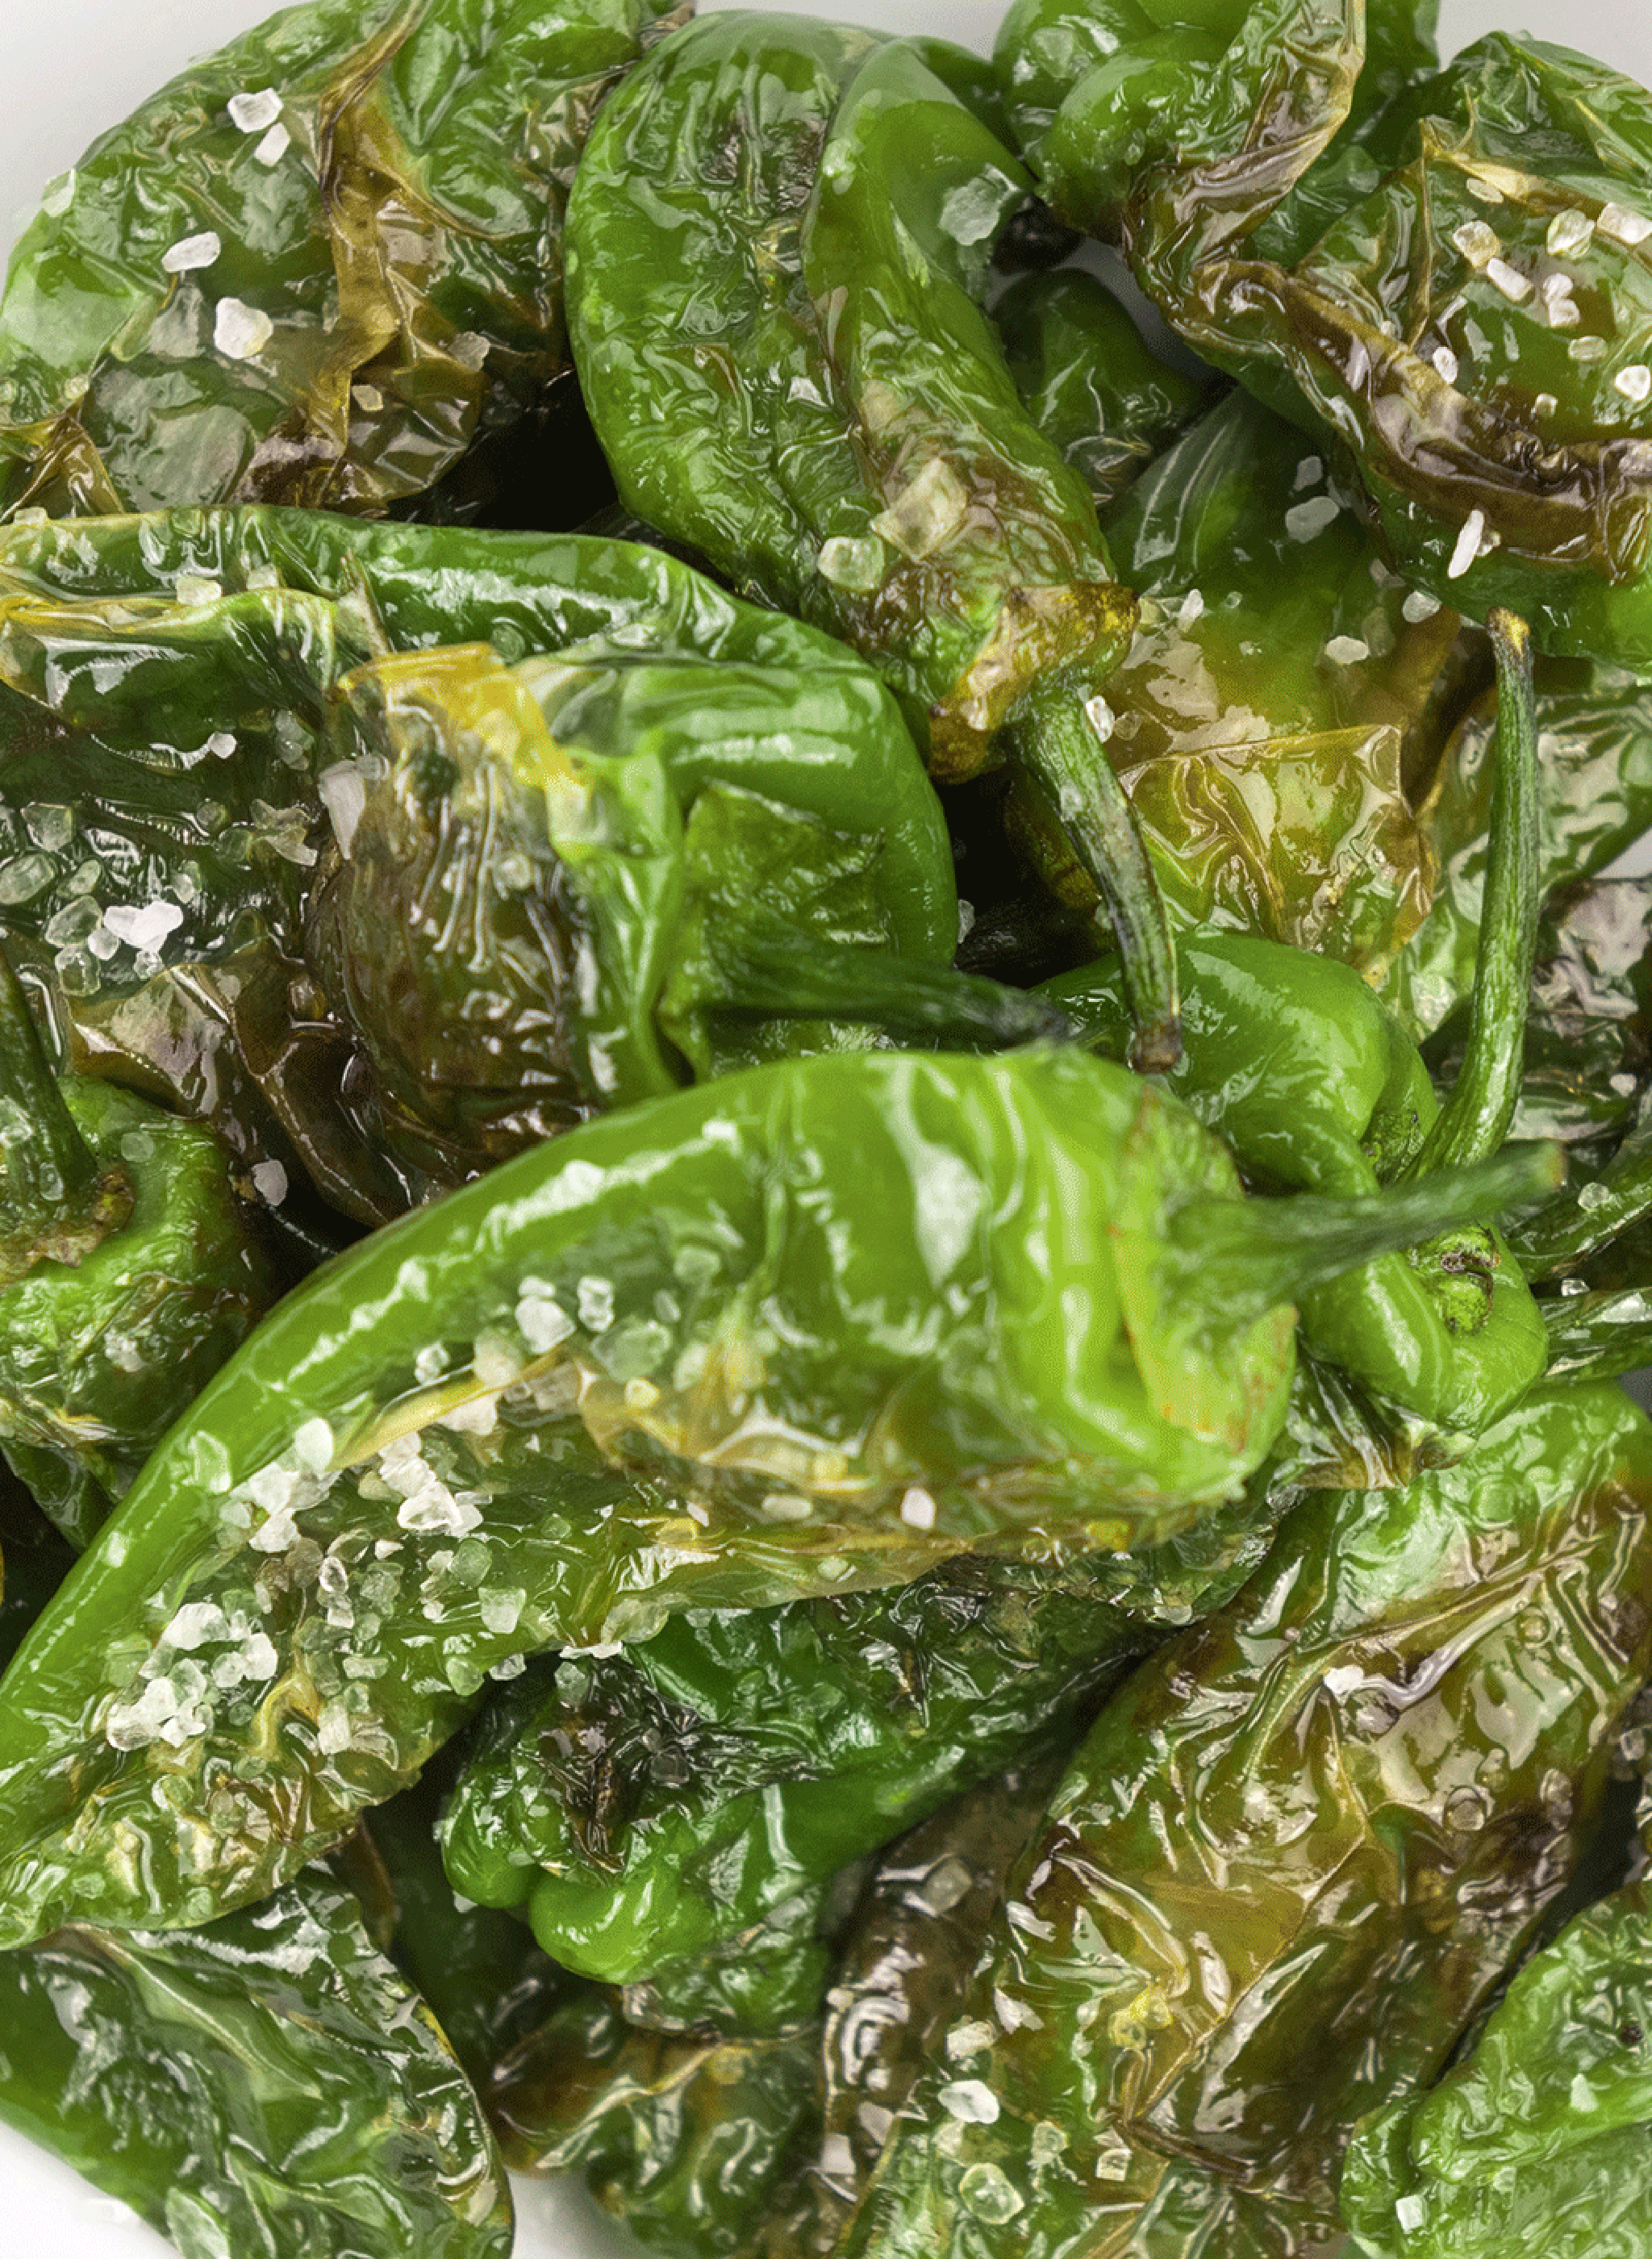 The small green peppers, fried and with a little olive oil and salt, come from the Galician town of Padrón.